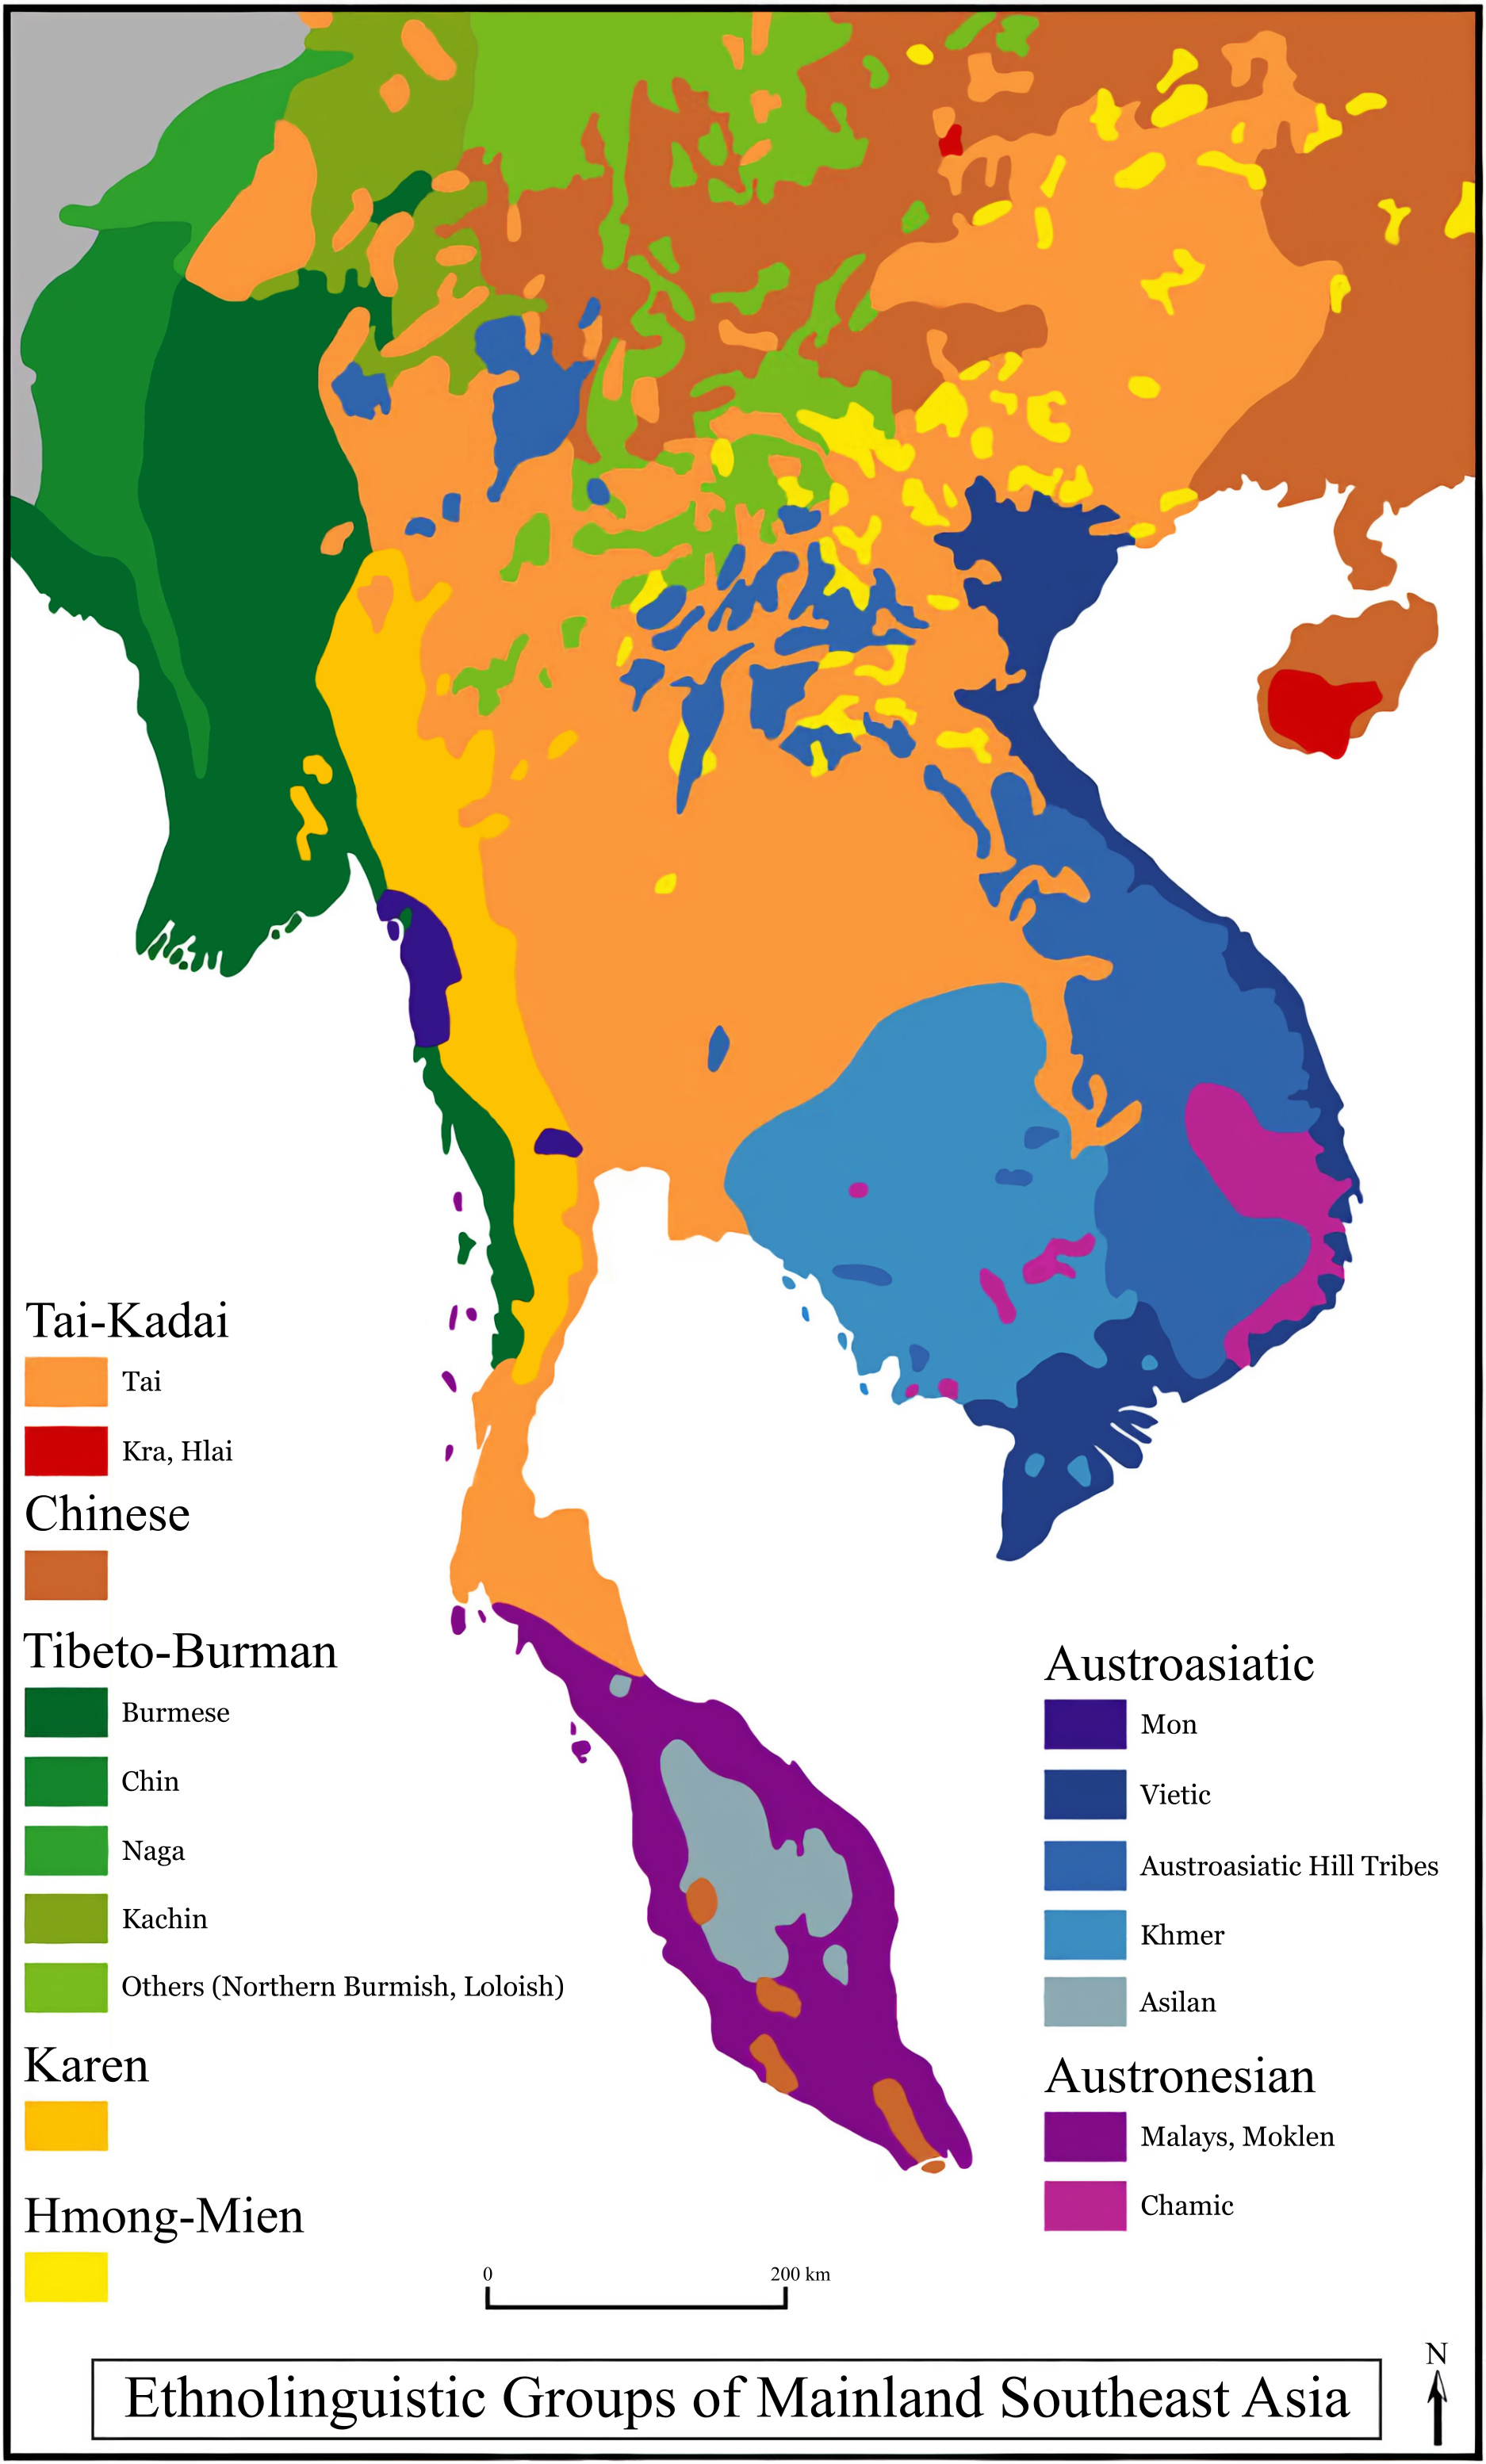 What is the most spoken language in Southeast Asia?